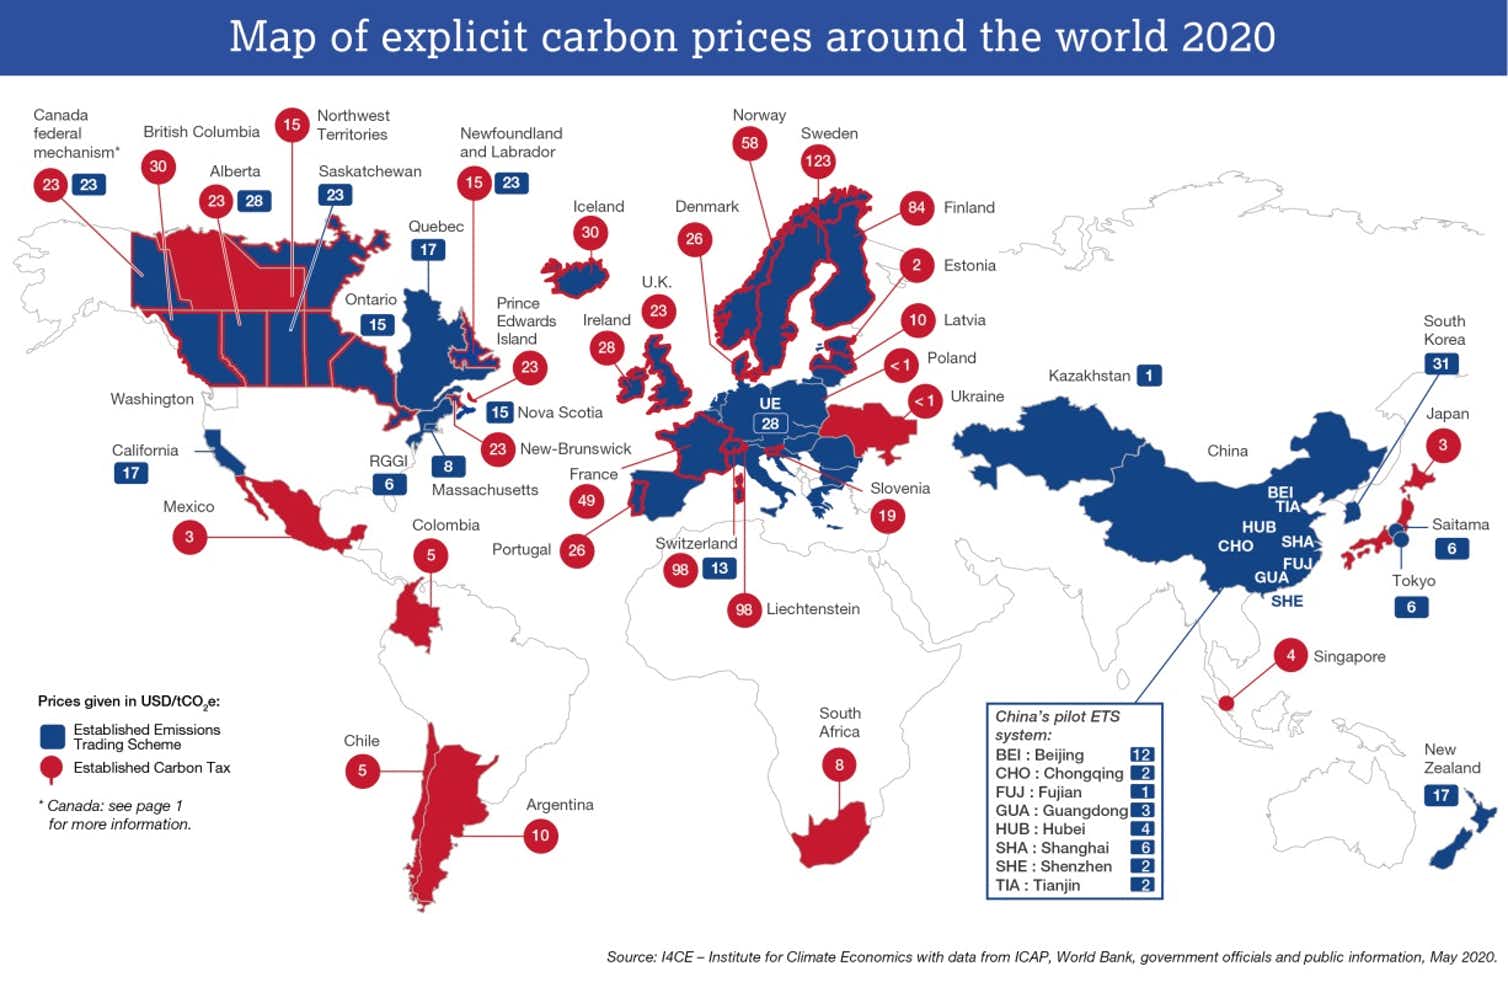 A red and blue coloured world map of explicit carbon prices